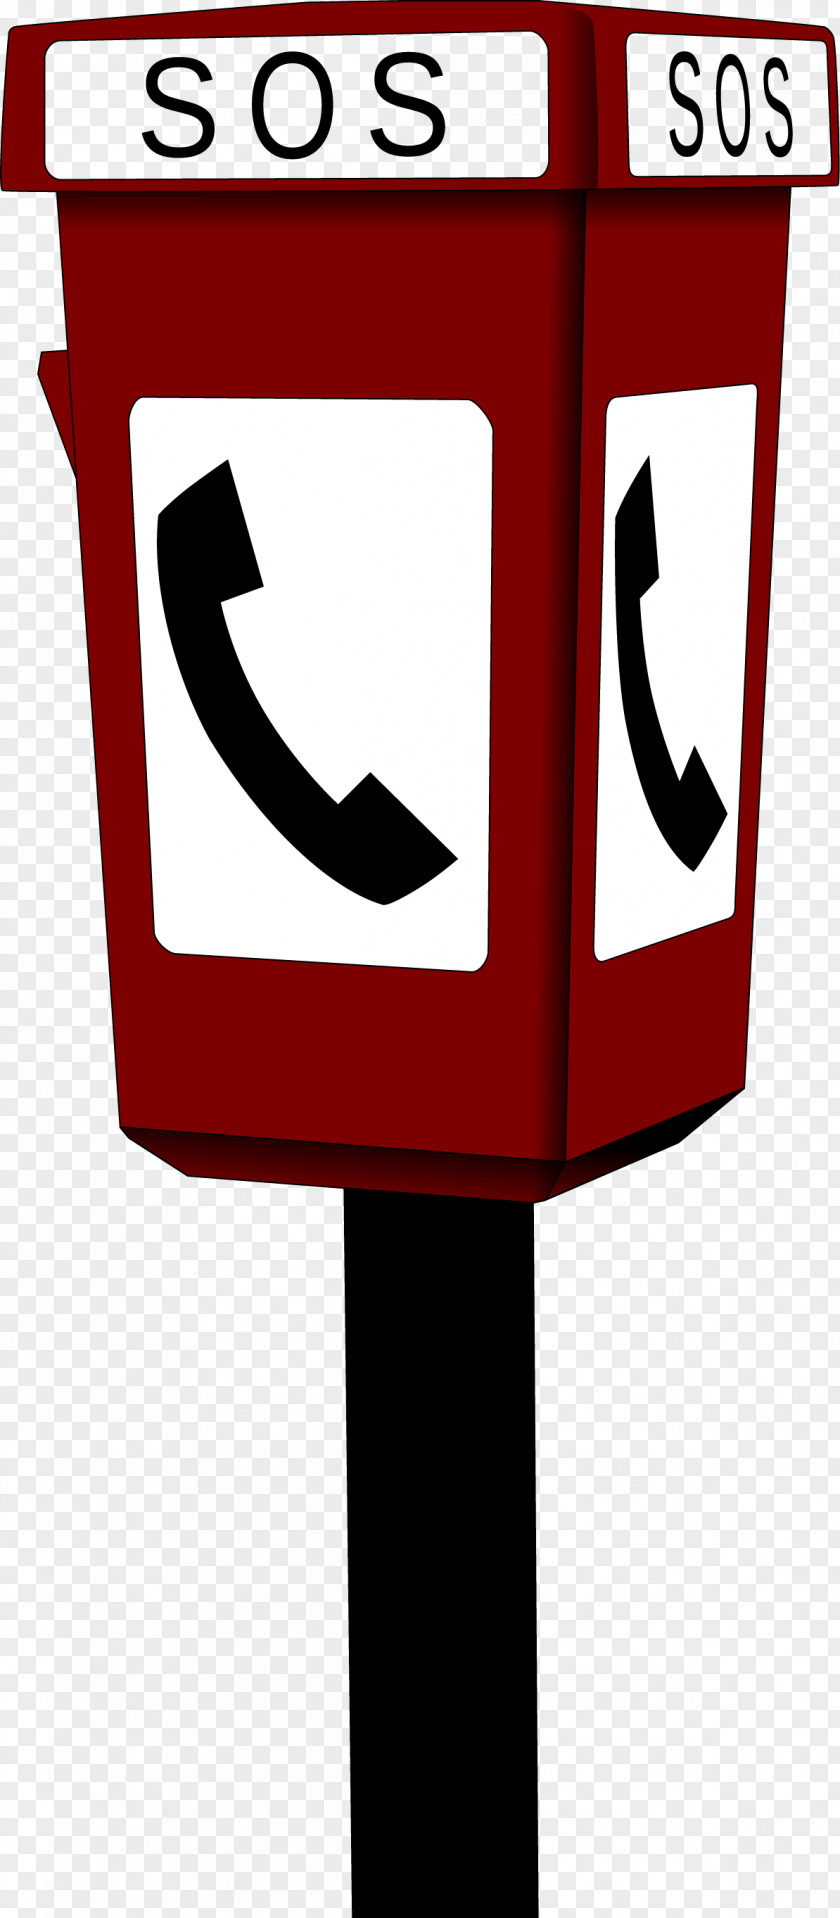 Vector Phone Booth Telephone Red Box Clip Art PNG